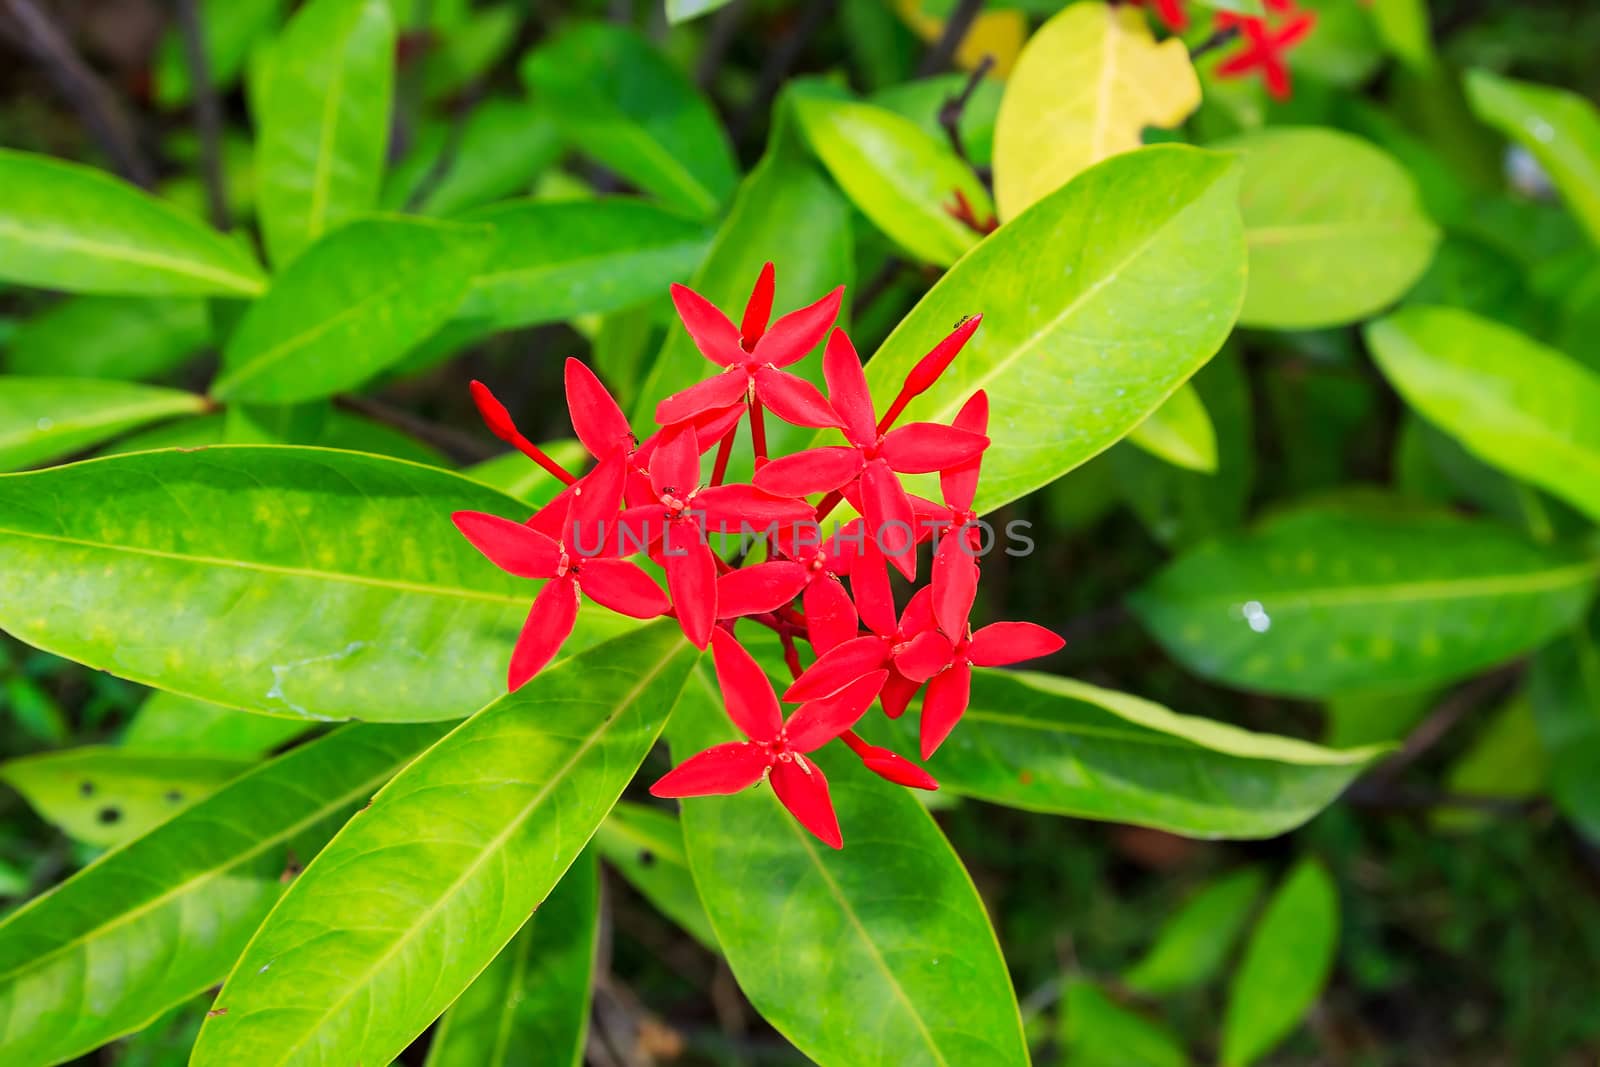 The bunch of beautiful orange-red Ixora with green leaves.